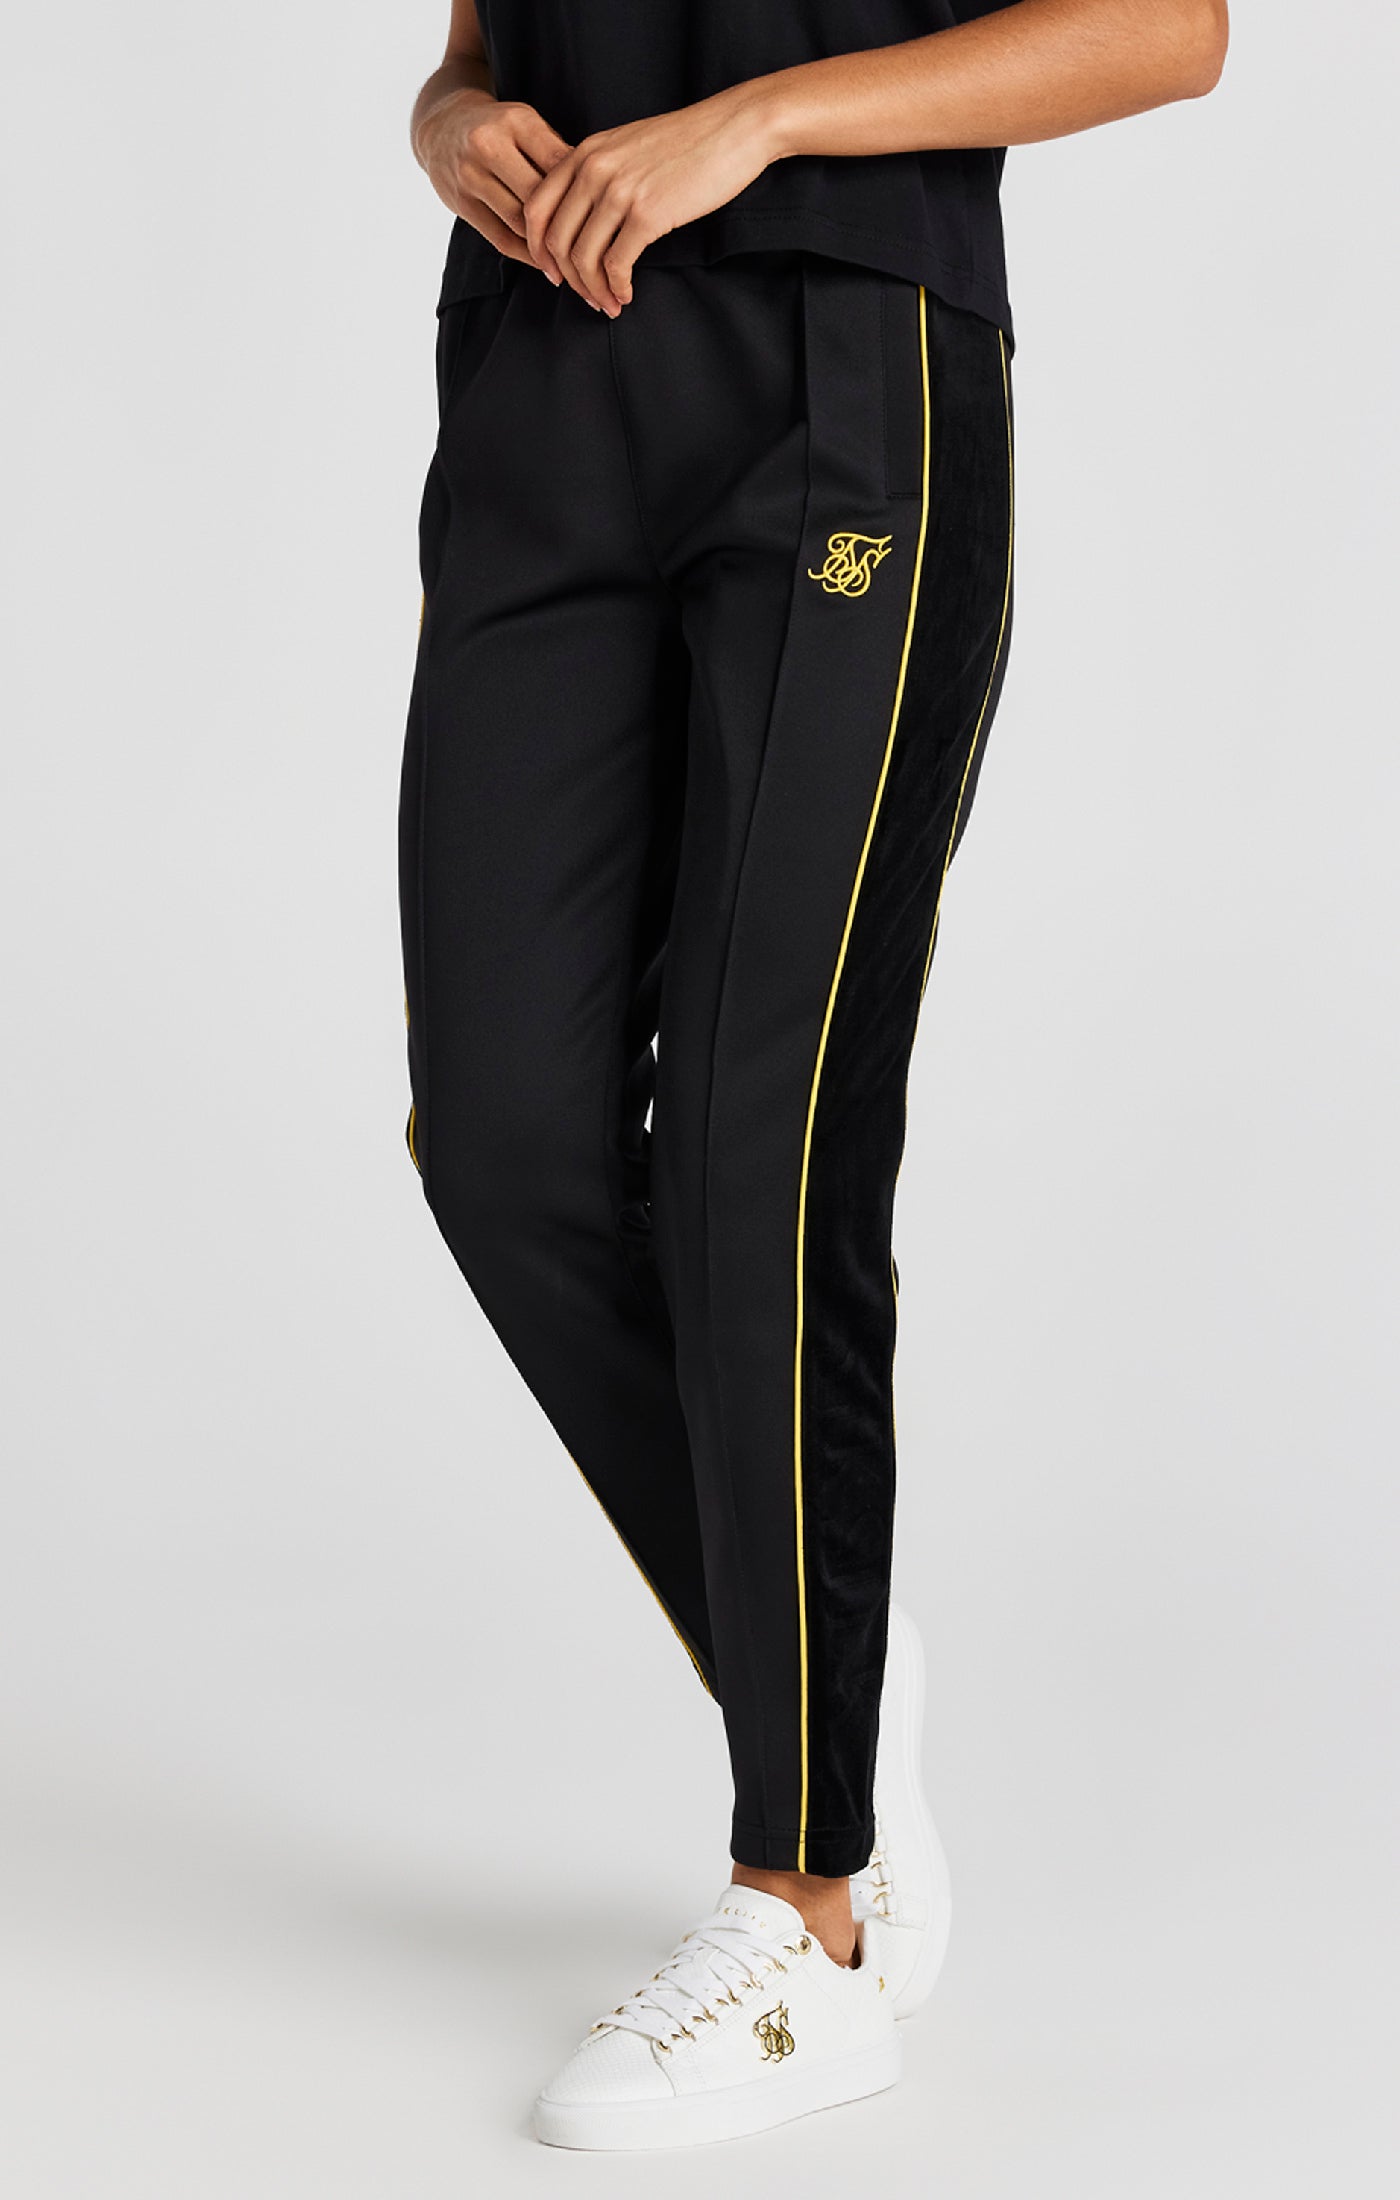 Firebird Tracksuit Bottoms Collegiate Navy ED7509 | Adidas tracksuit women,  Adidas leggings outfit, Track pants outfit